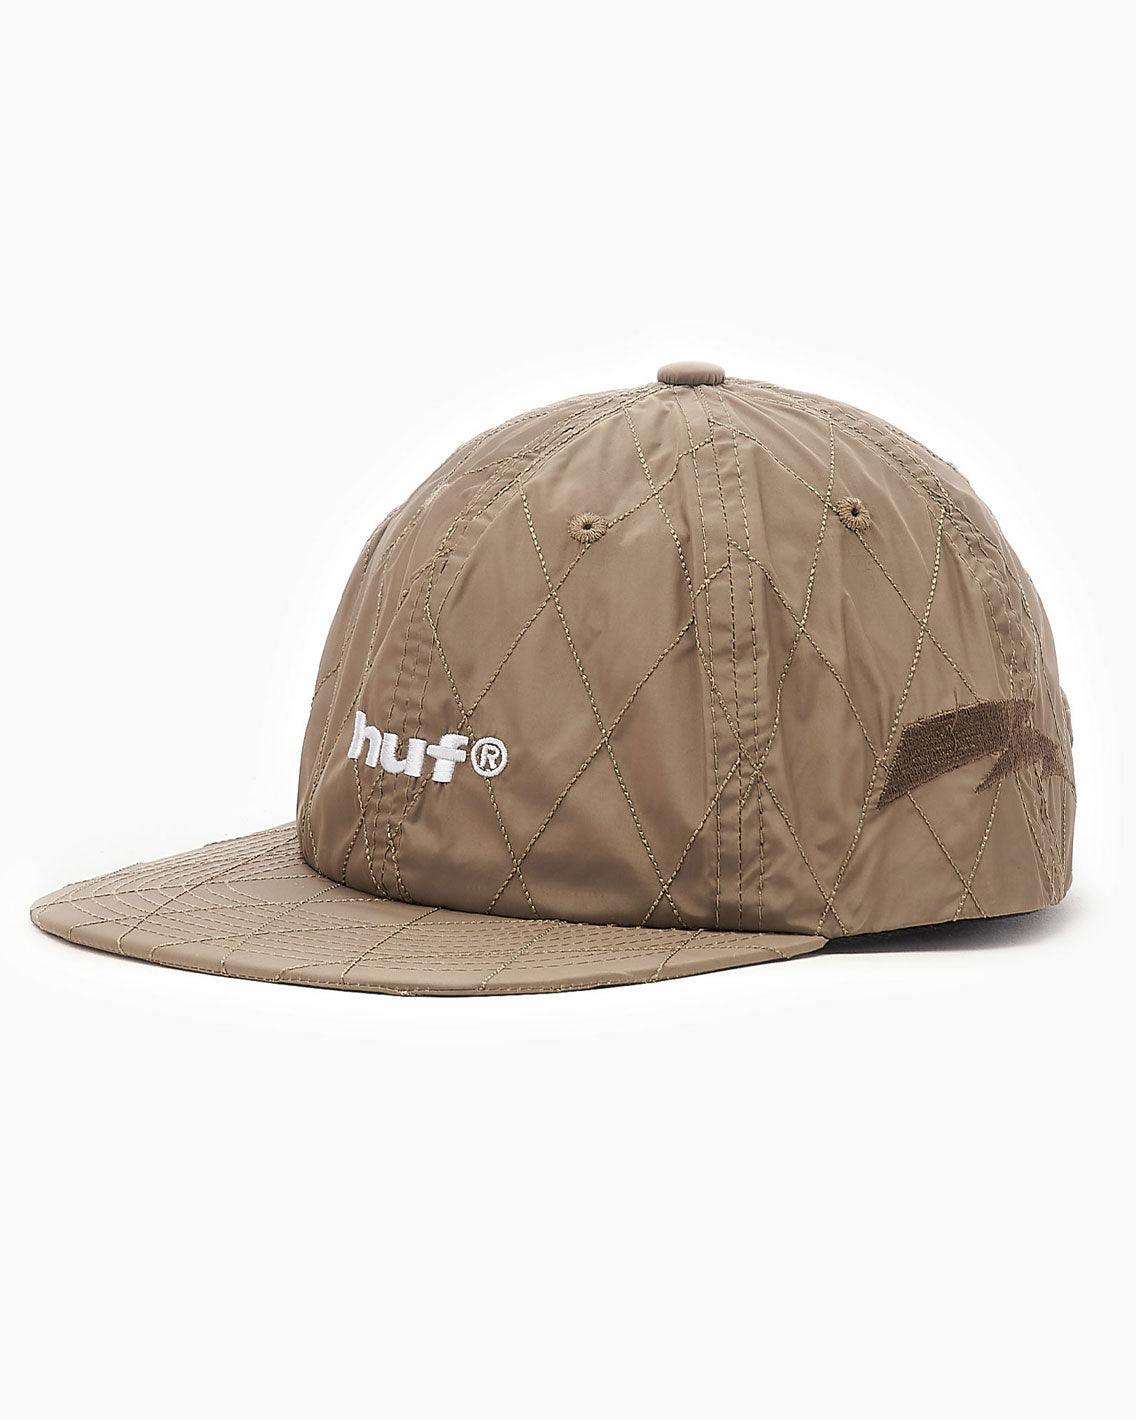 HUF - Lightning Quilted 6 Panel Hat - Tan Hats HUF   